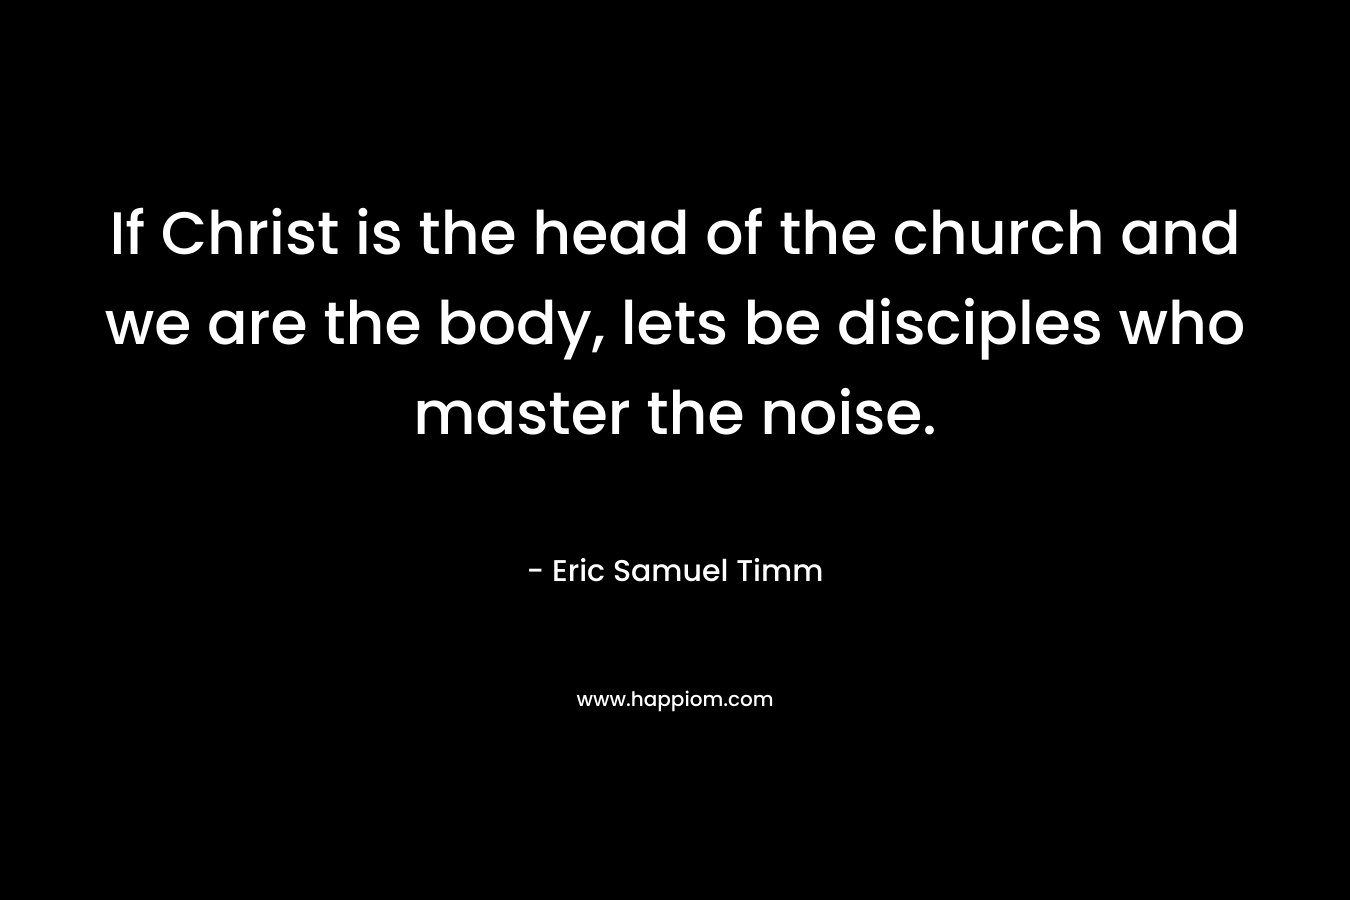 If Christ is the head of the church and we are the body, lets be disciples who master the noise. – Eric Samuel Timm